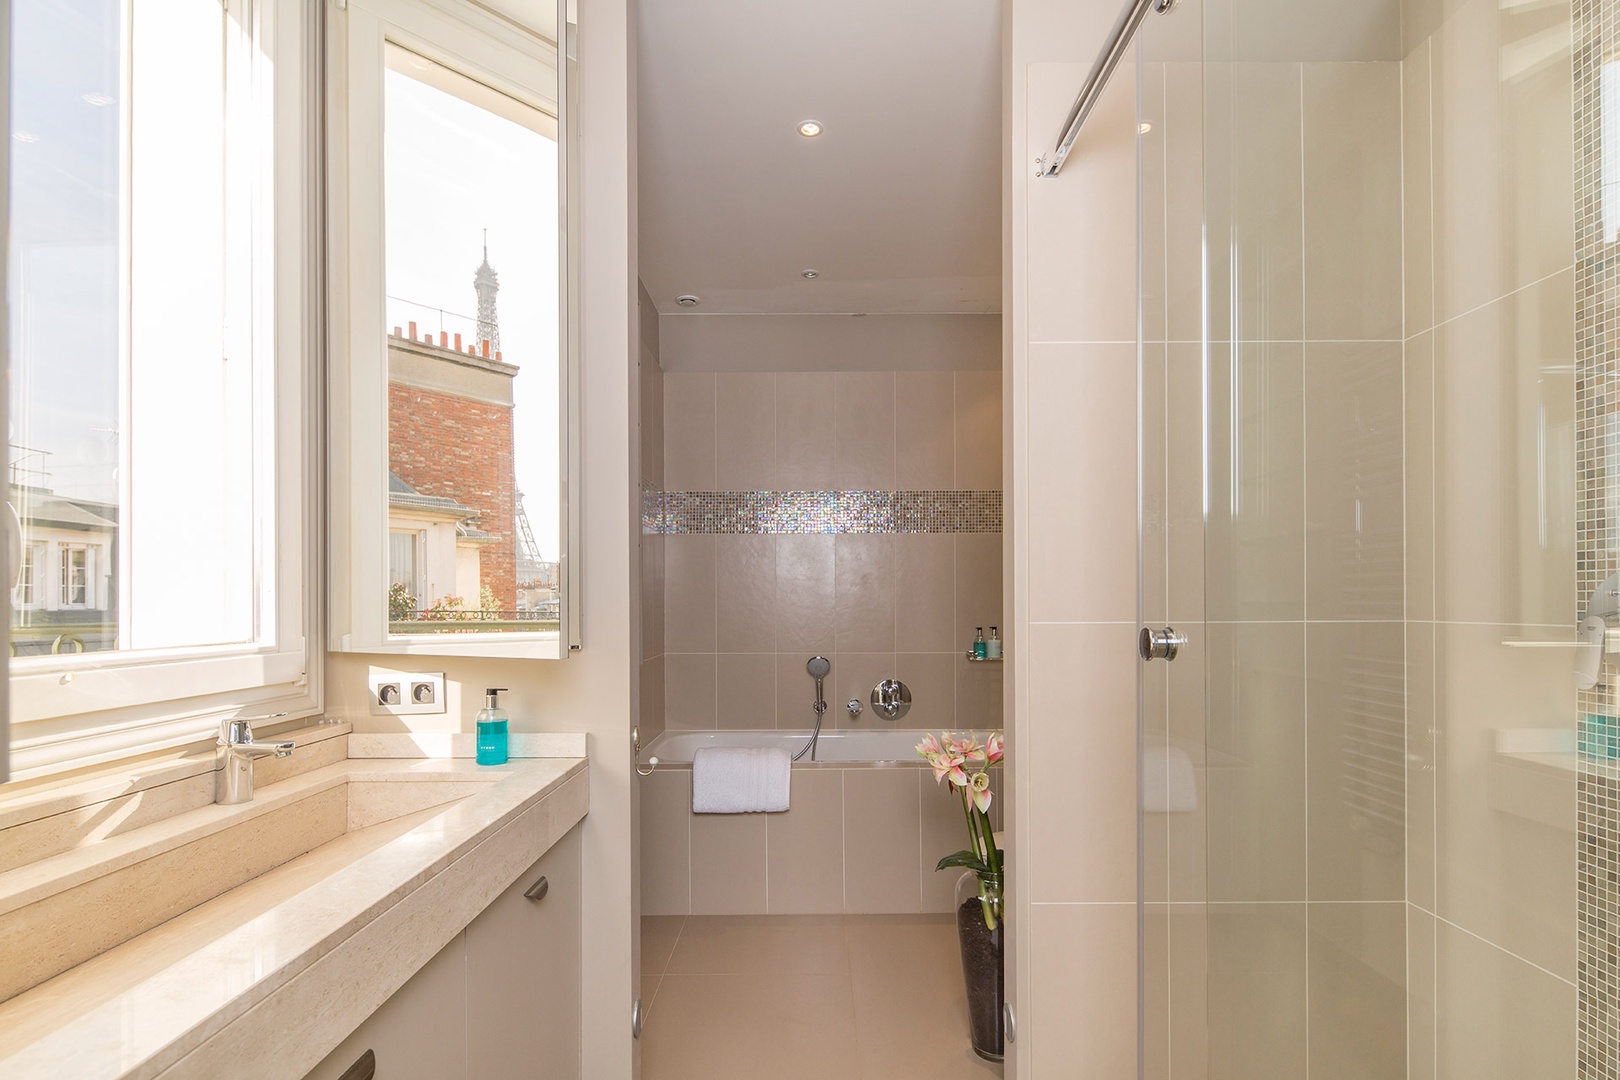 The luxurious en suite bathroom is equipped with a bathtub, shower, sink & toilet.